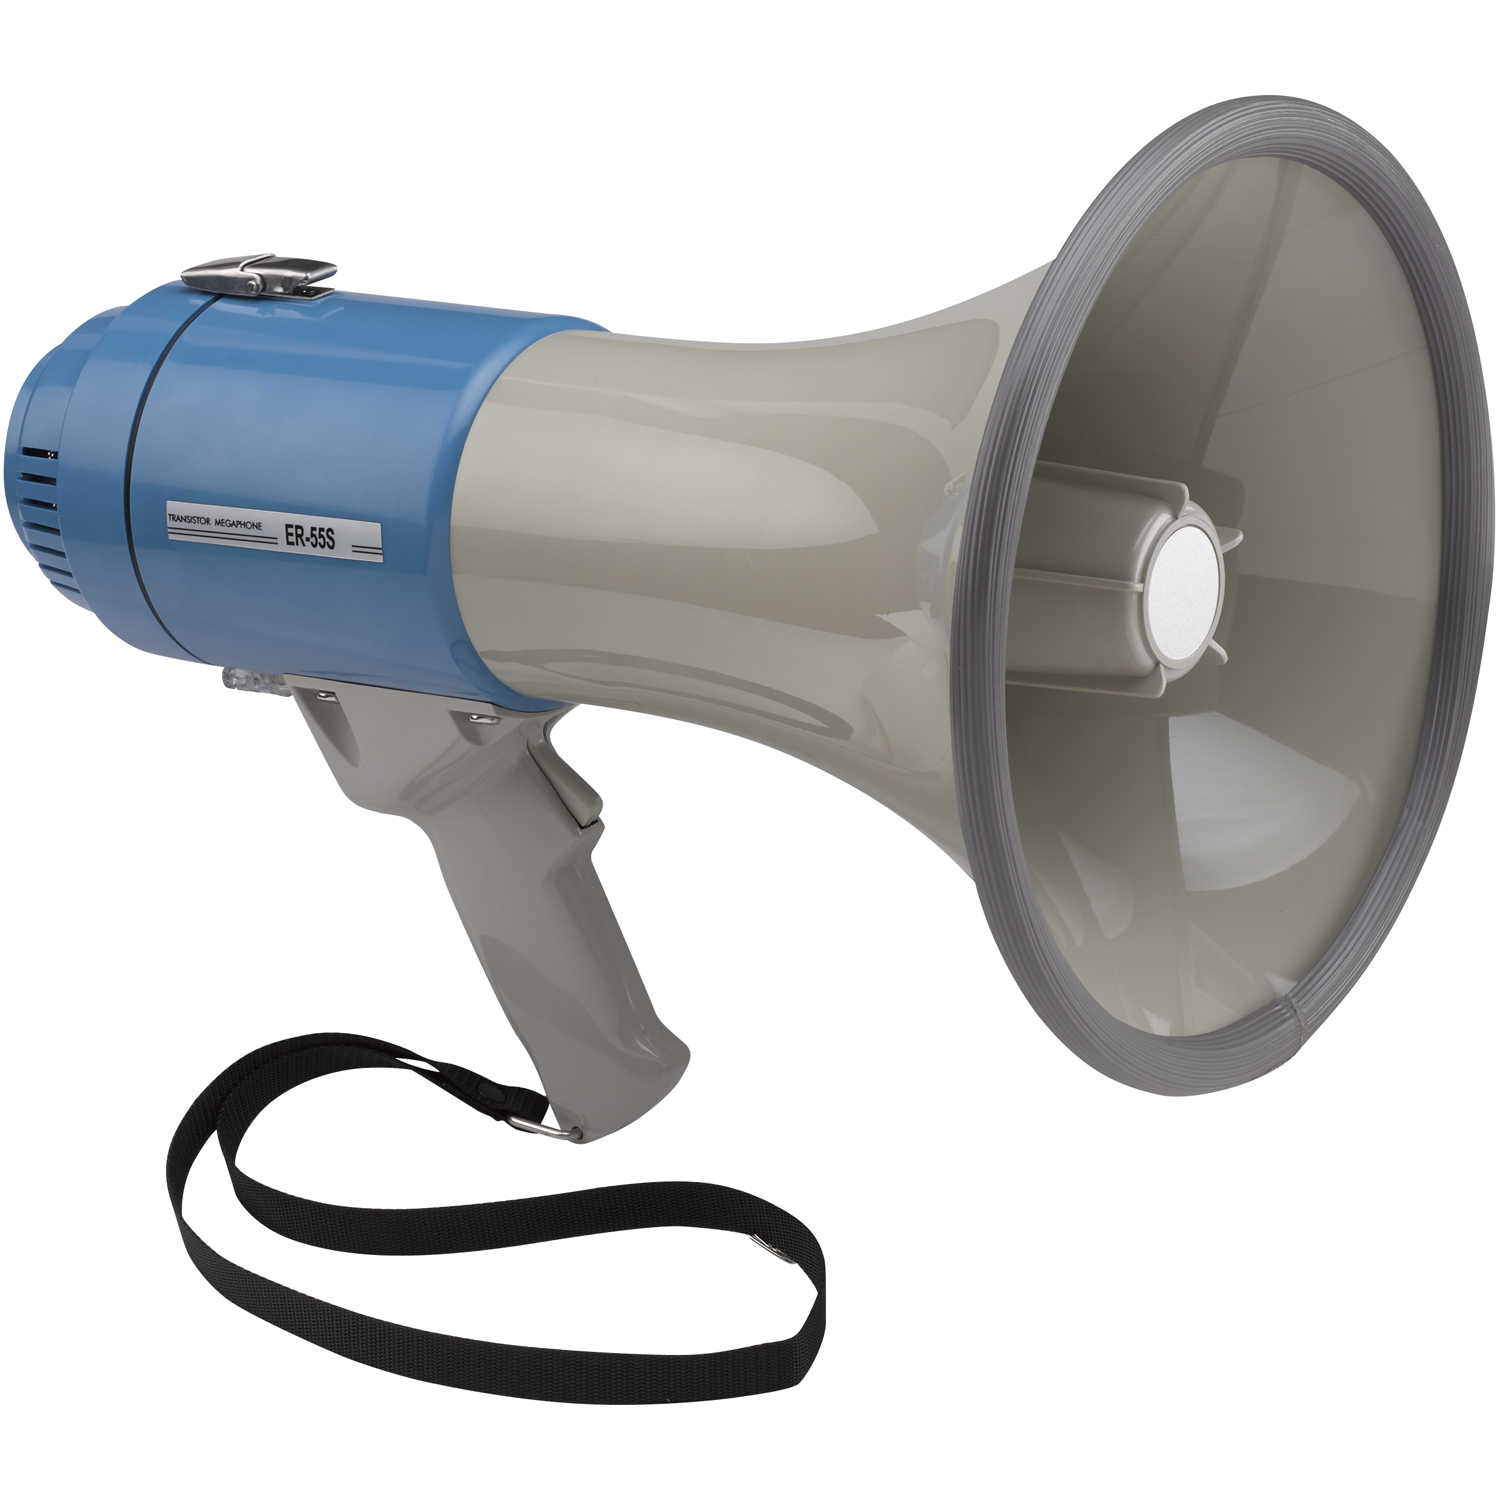 Megaphone With Siren Forestry Suppliers Inc